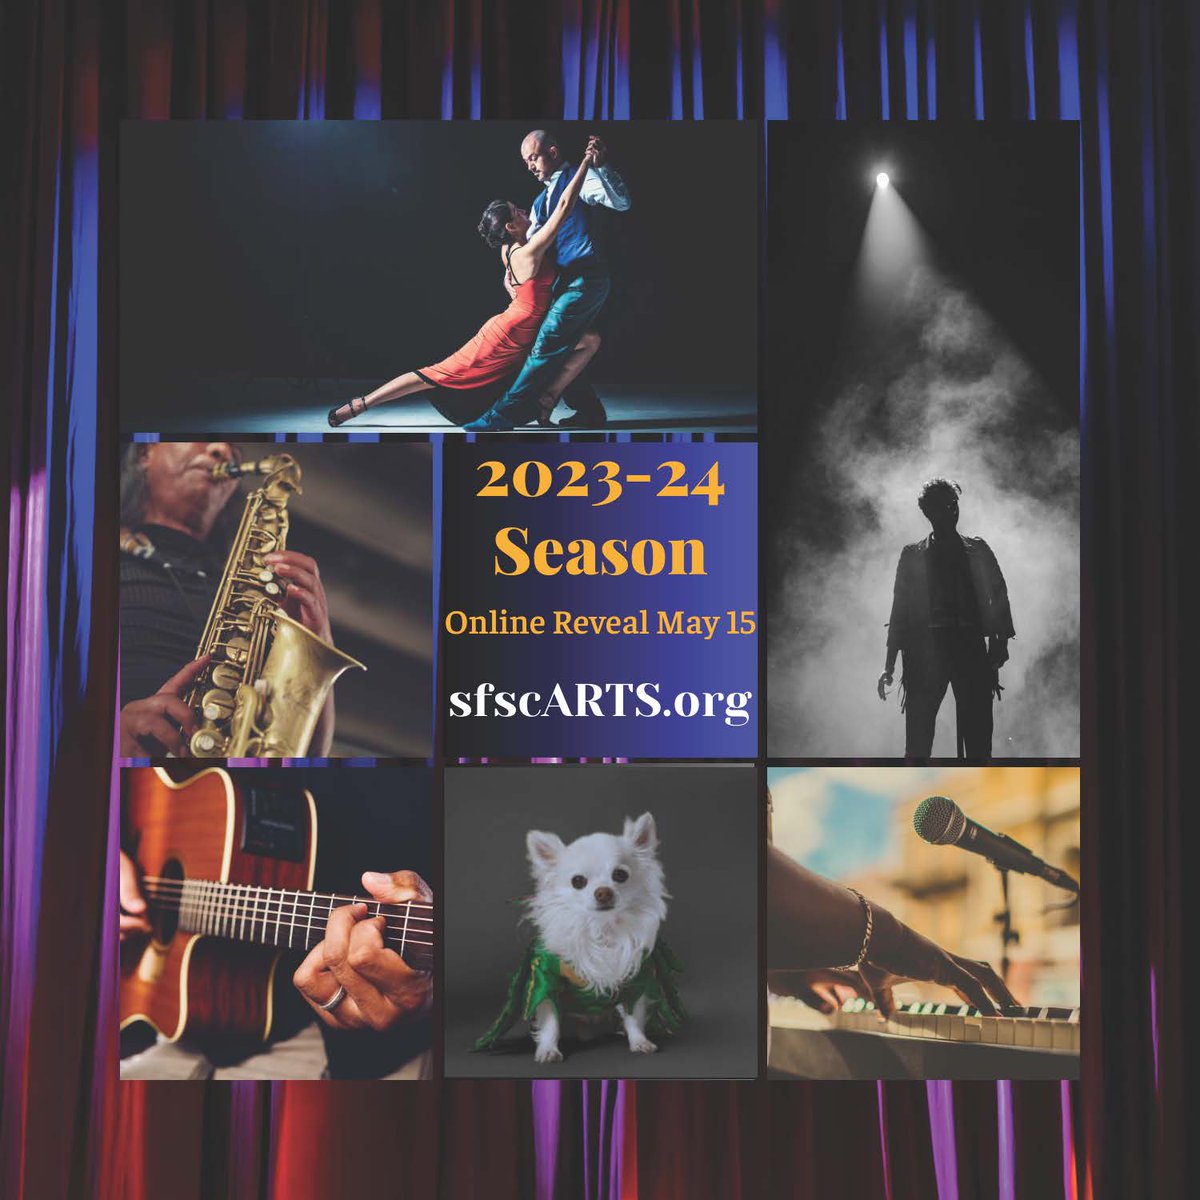 What shows will you see for the 2023-2024 Season with SFSC Arts? 
Check out the full season at sfscARTS.org

#ConnectBackToYourAlmaMater
#SFSCAlumniAssociation 
#croceplayscroce
#broadwaymusicals
#johnnycashexperience
#JudyGarland100thAnniversary
#tango